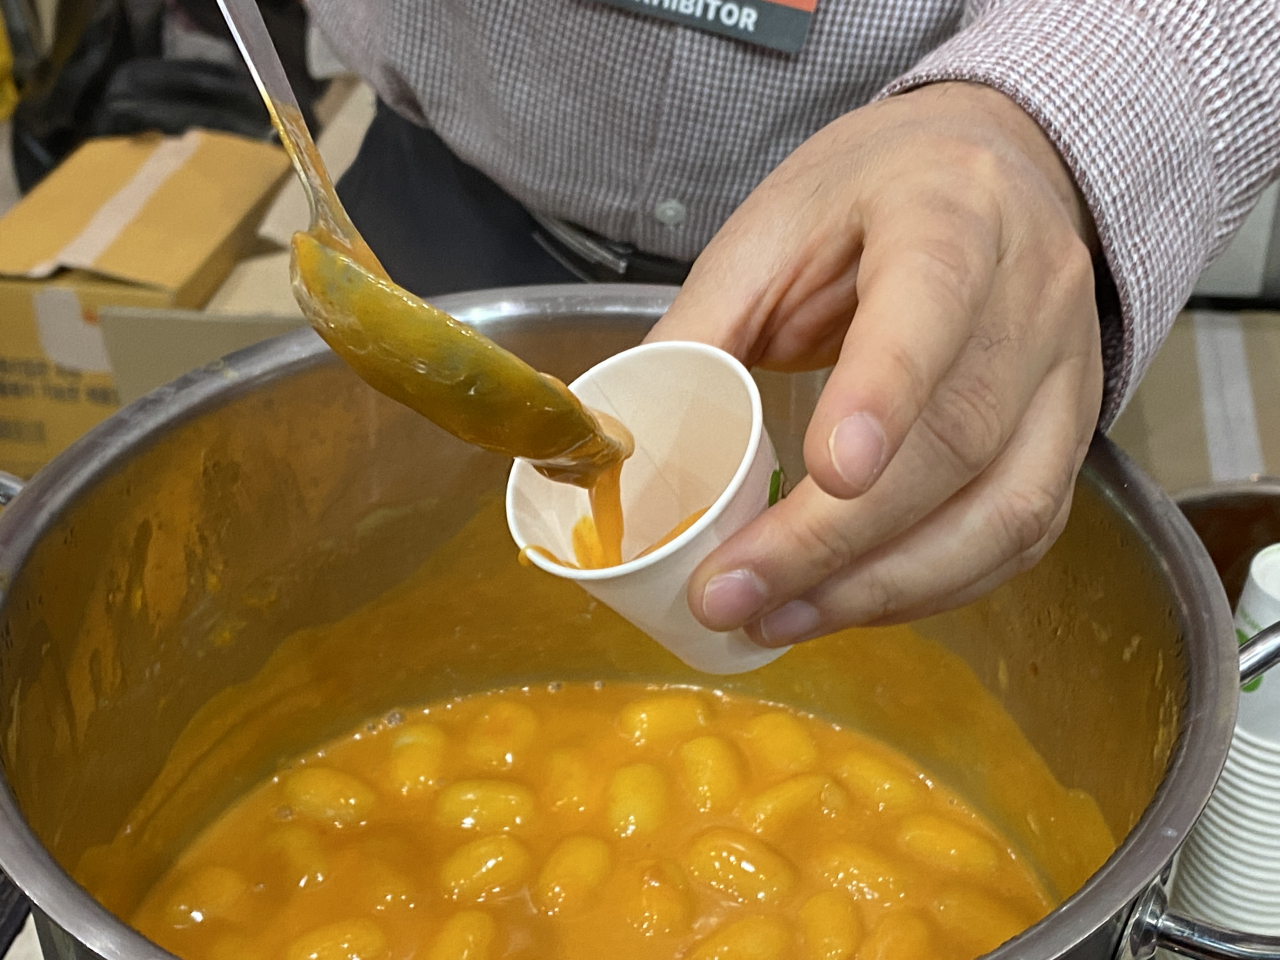 Misslee tteokbokki is ladled into a disposable paper cup at 2023 Coex Food Week, held at Coex in southern Seoul, Wednesday. (Hwang Joo-young/The Korea Herald)